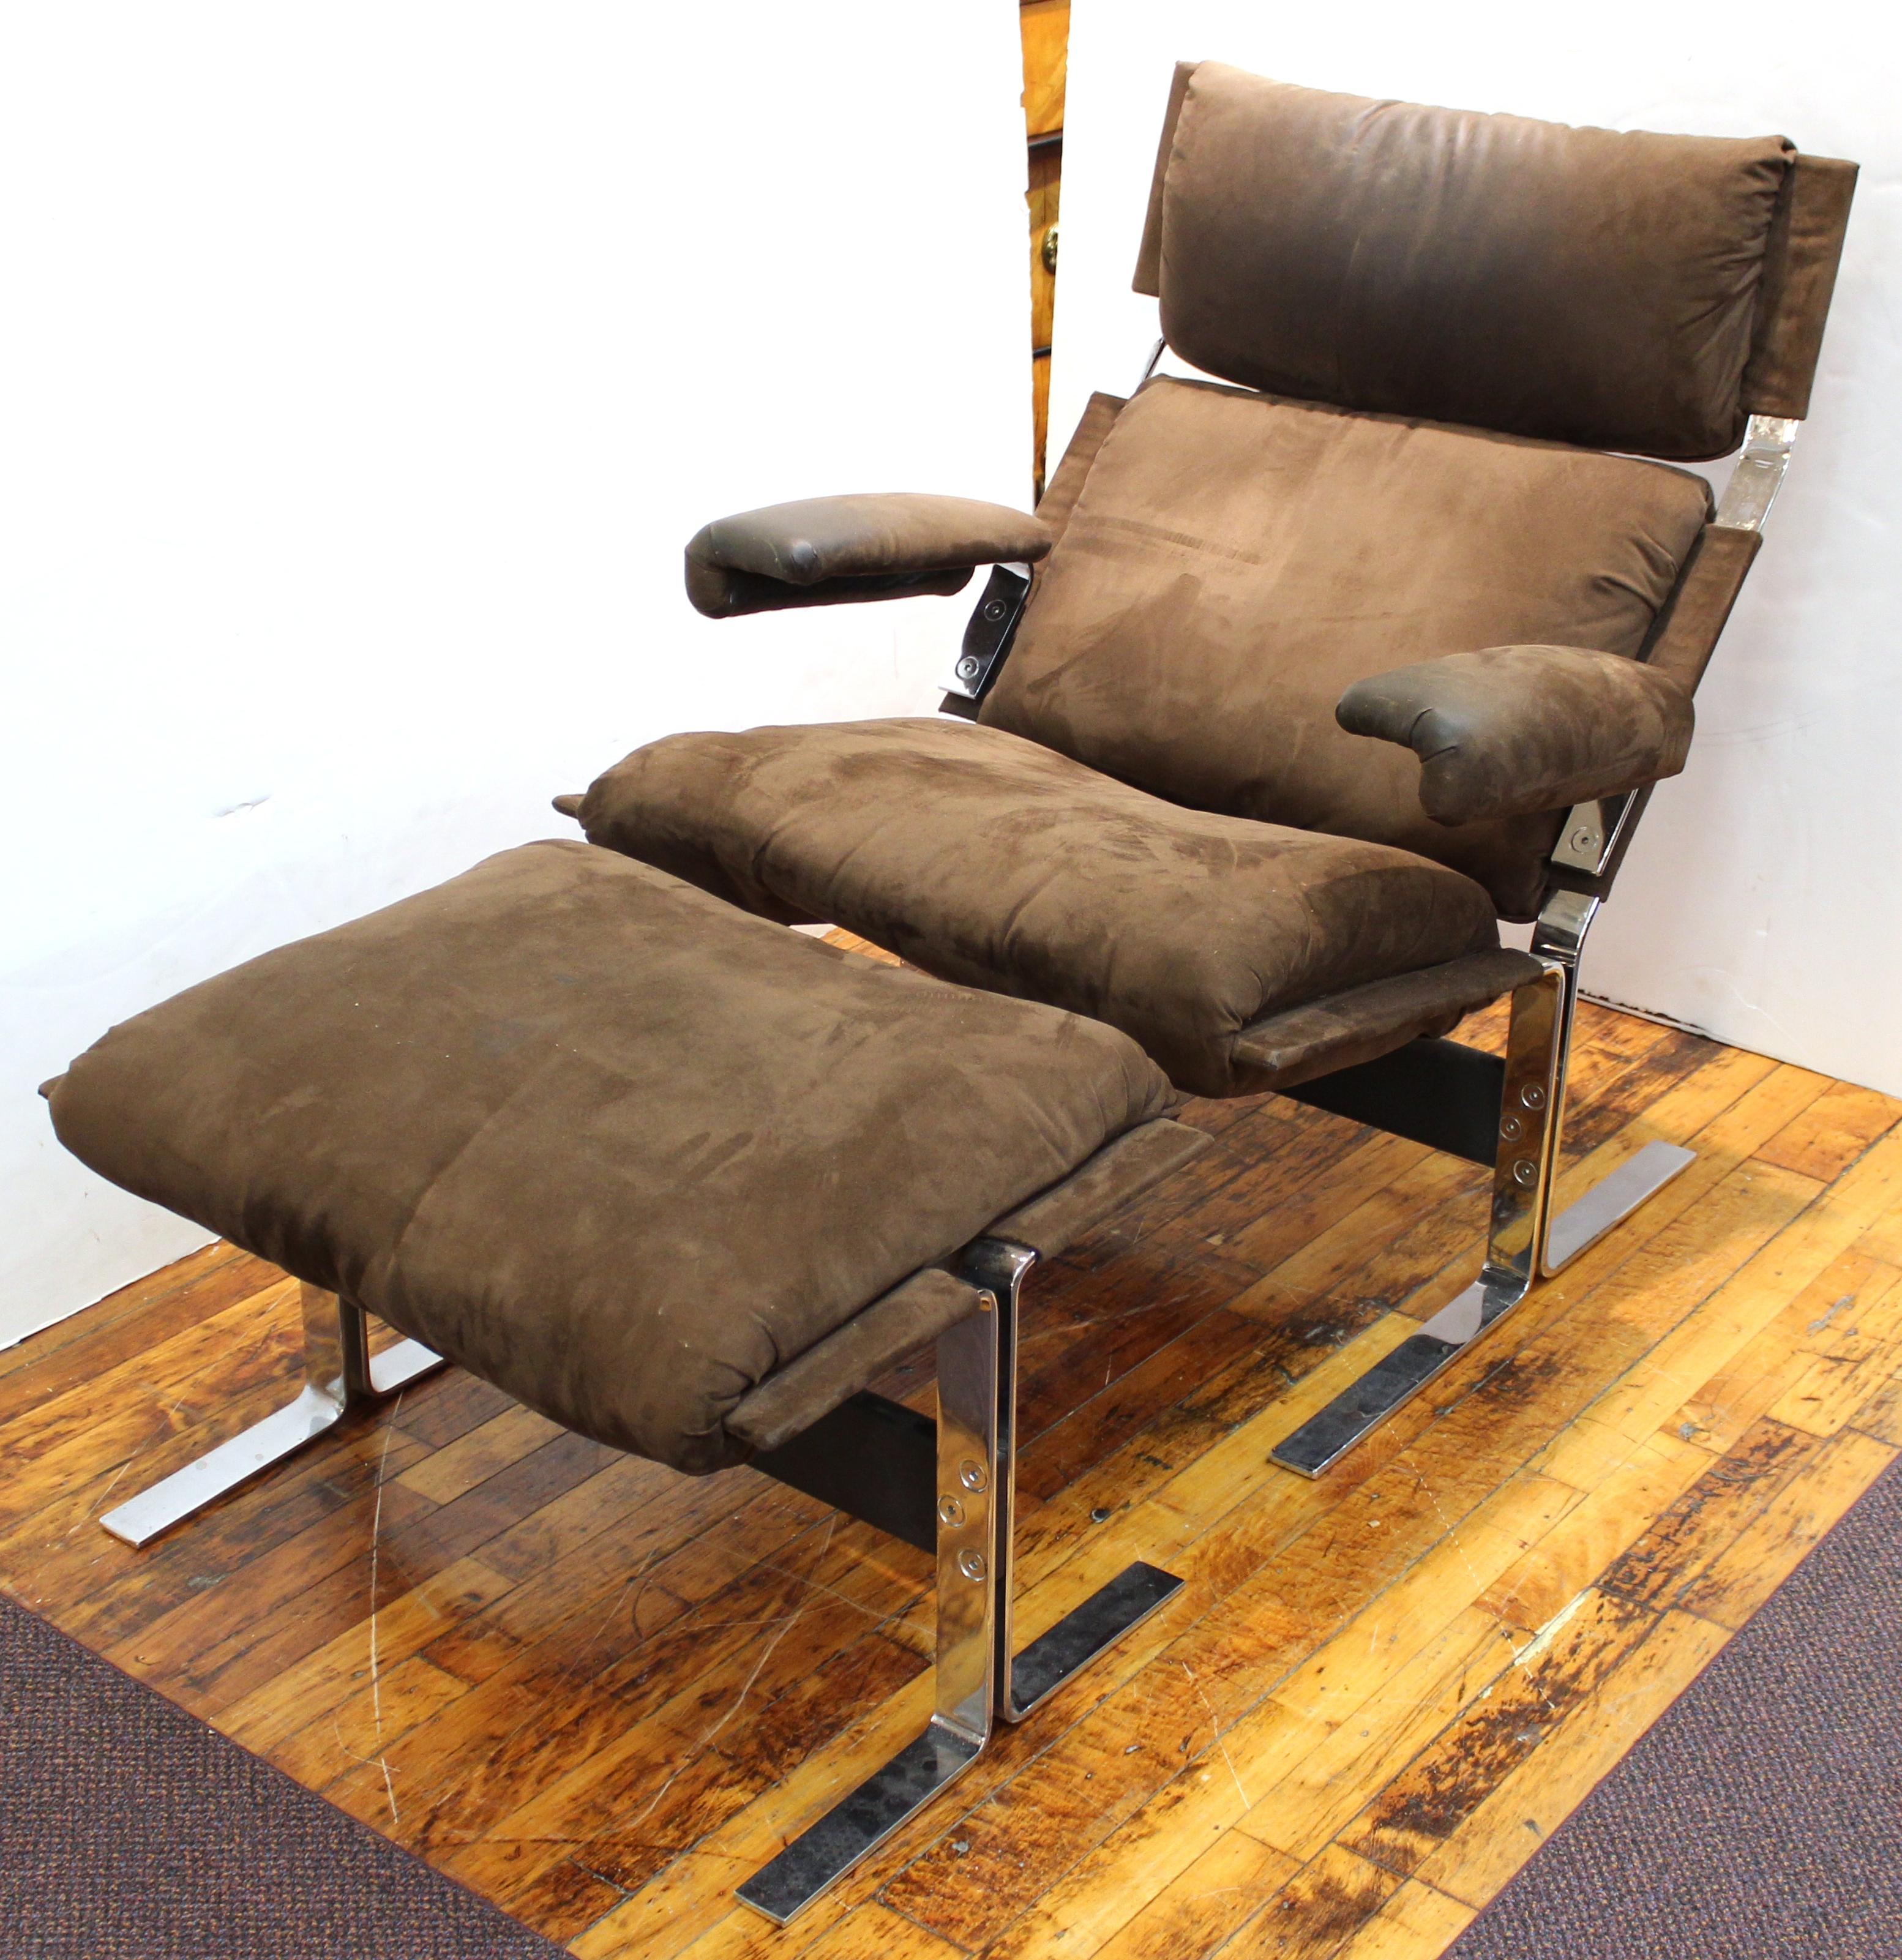 Richard Hersberger for Saporiti Italian modern lounge chair with ottoman in a nickel-plated frame. The set dates from the 1960s and is in great vintage condition.
Dimensions for chair: 37 in. H x 29 in. W x 36 in. D
Dimensions for ottoman: 19 in.